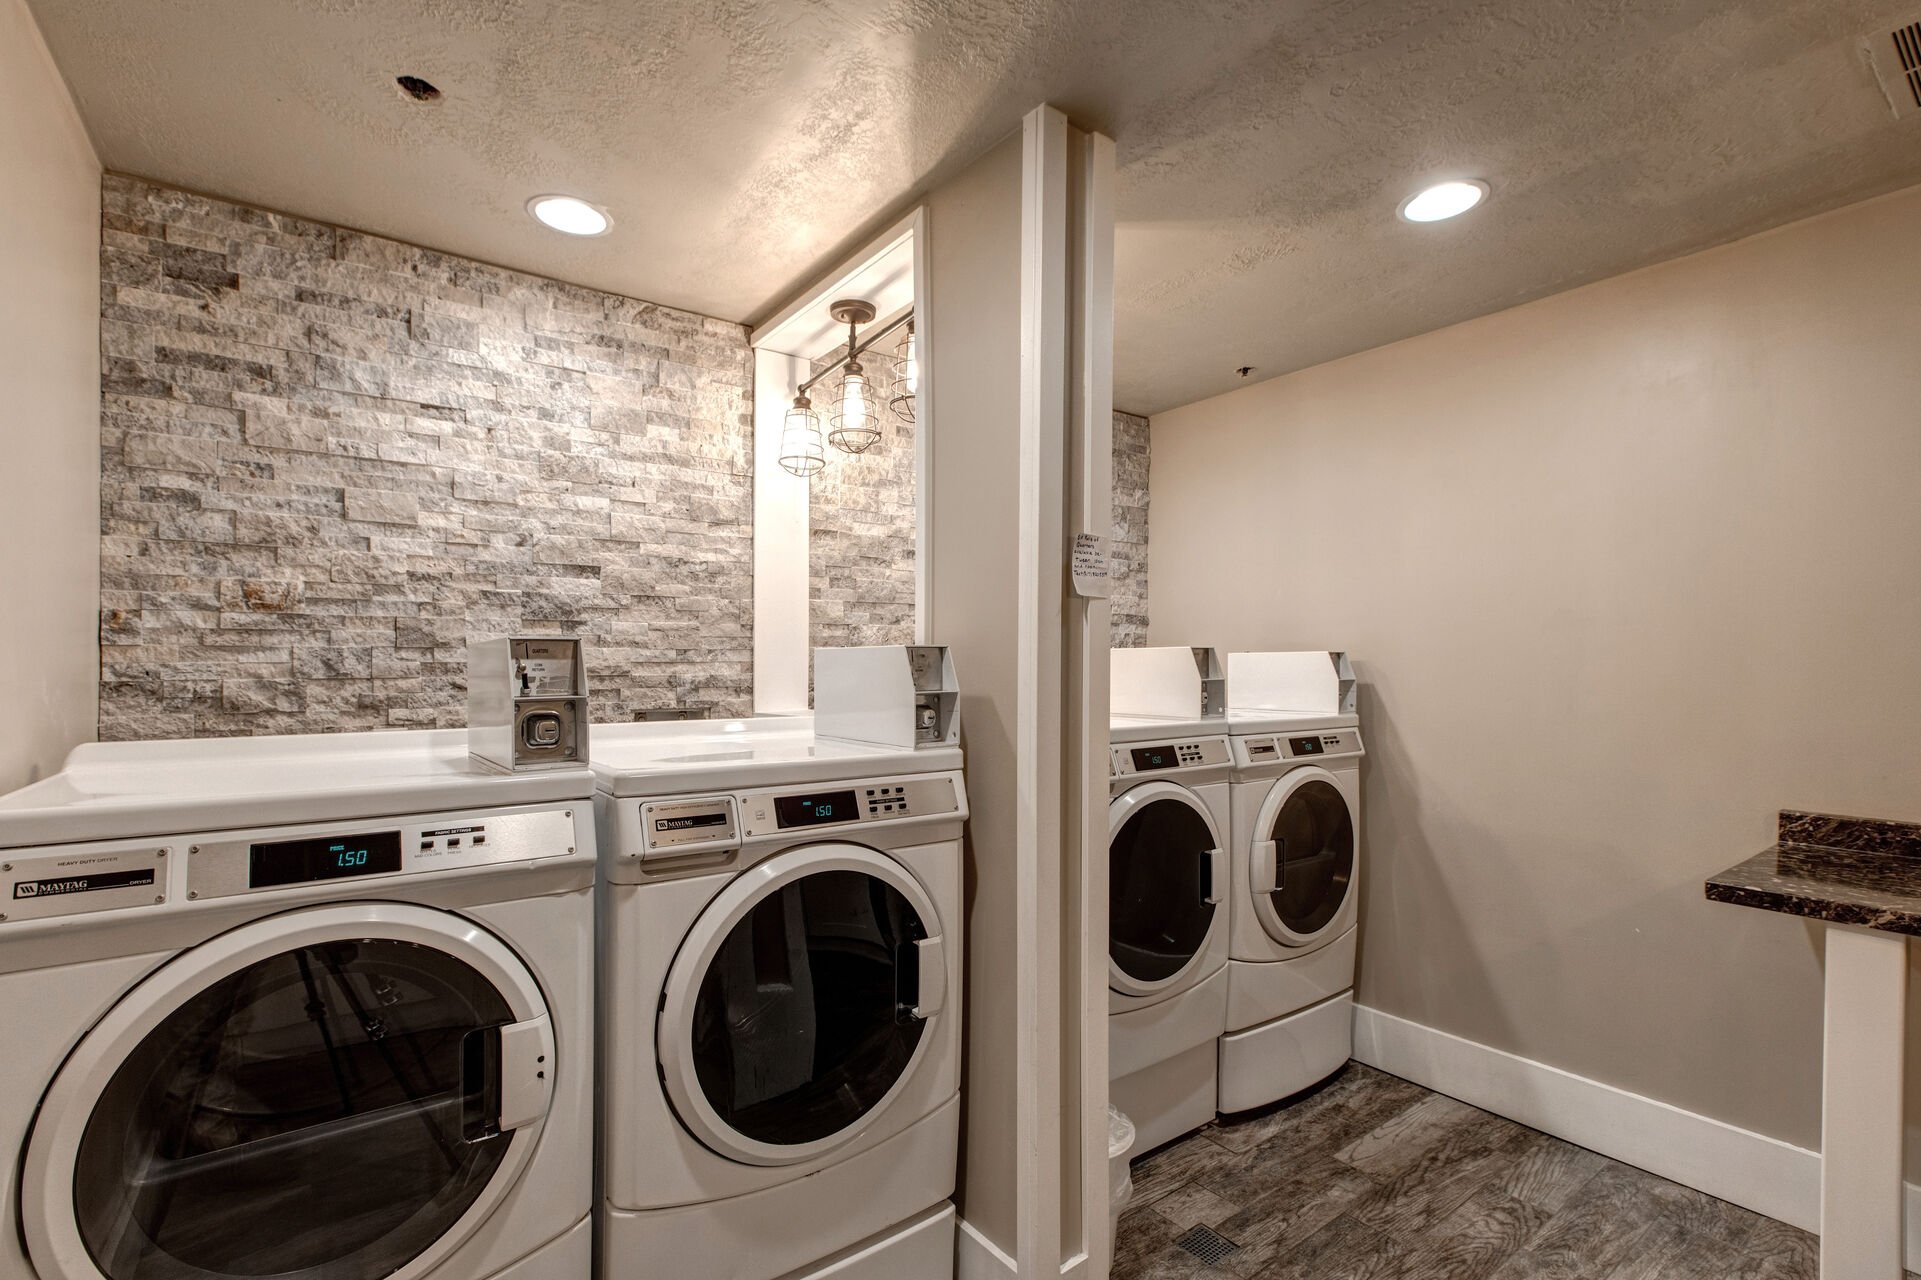 Communal Laundry Room with Coin-Operated Washers and Dryers